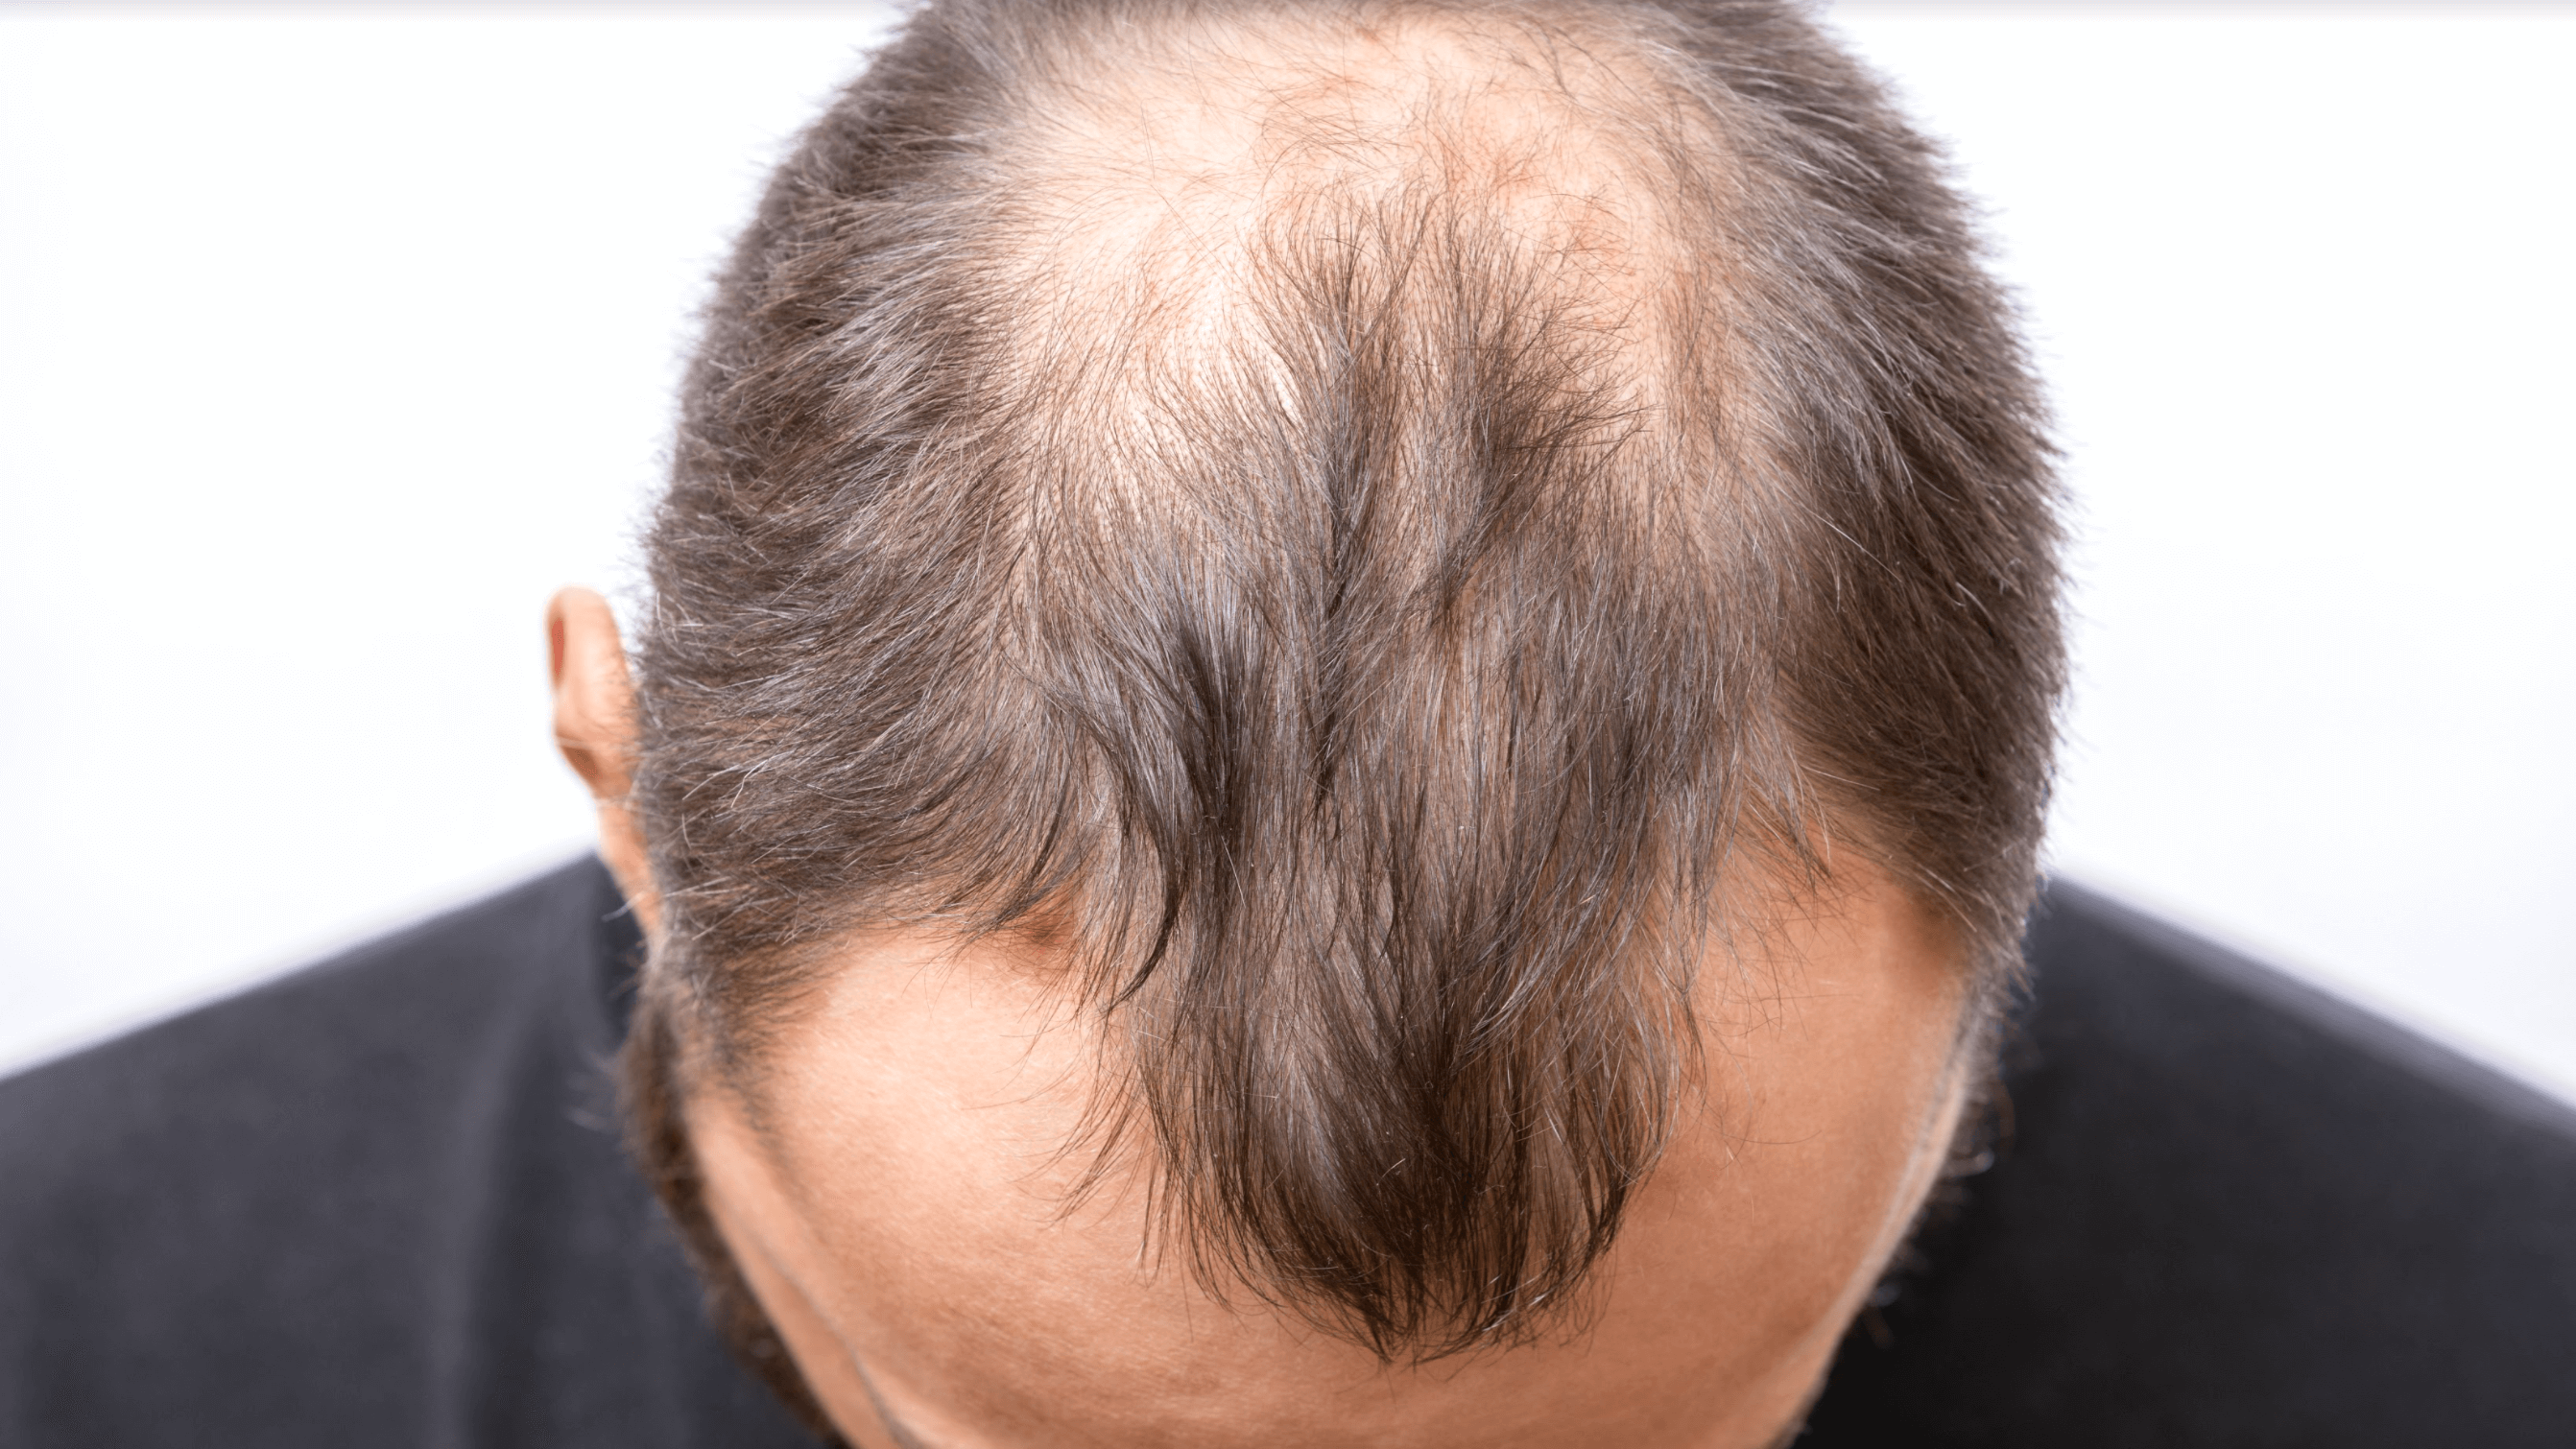 How Long Does Hair Take To Grow After A Hair Transplant?